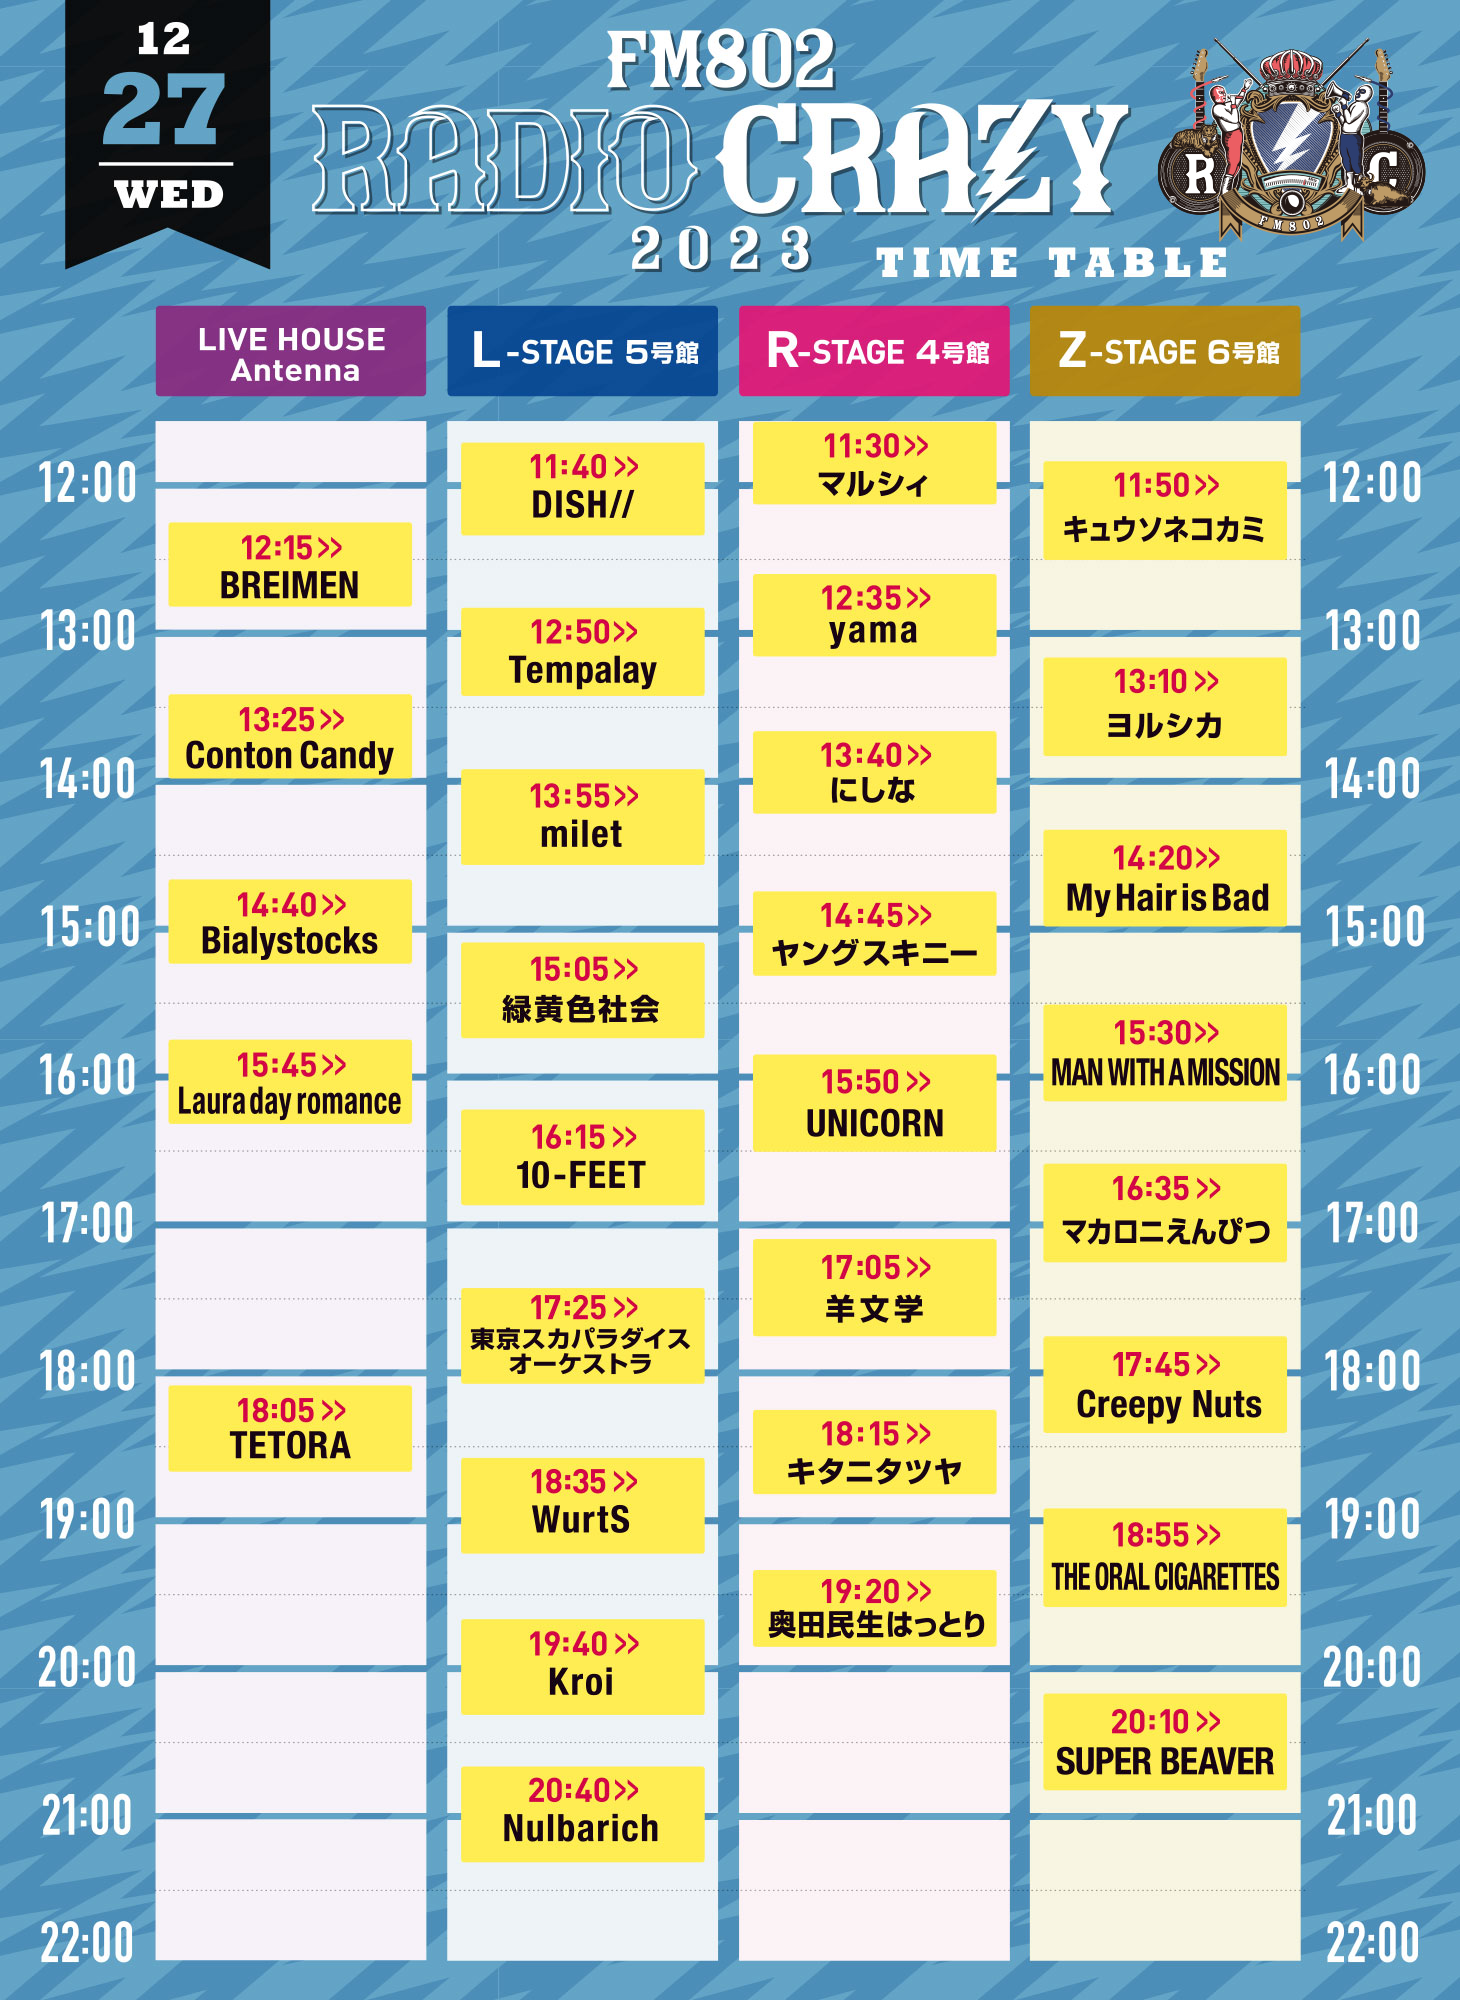 RADIO CRAZY TIME TABLE［27 WED］